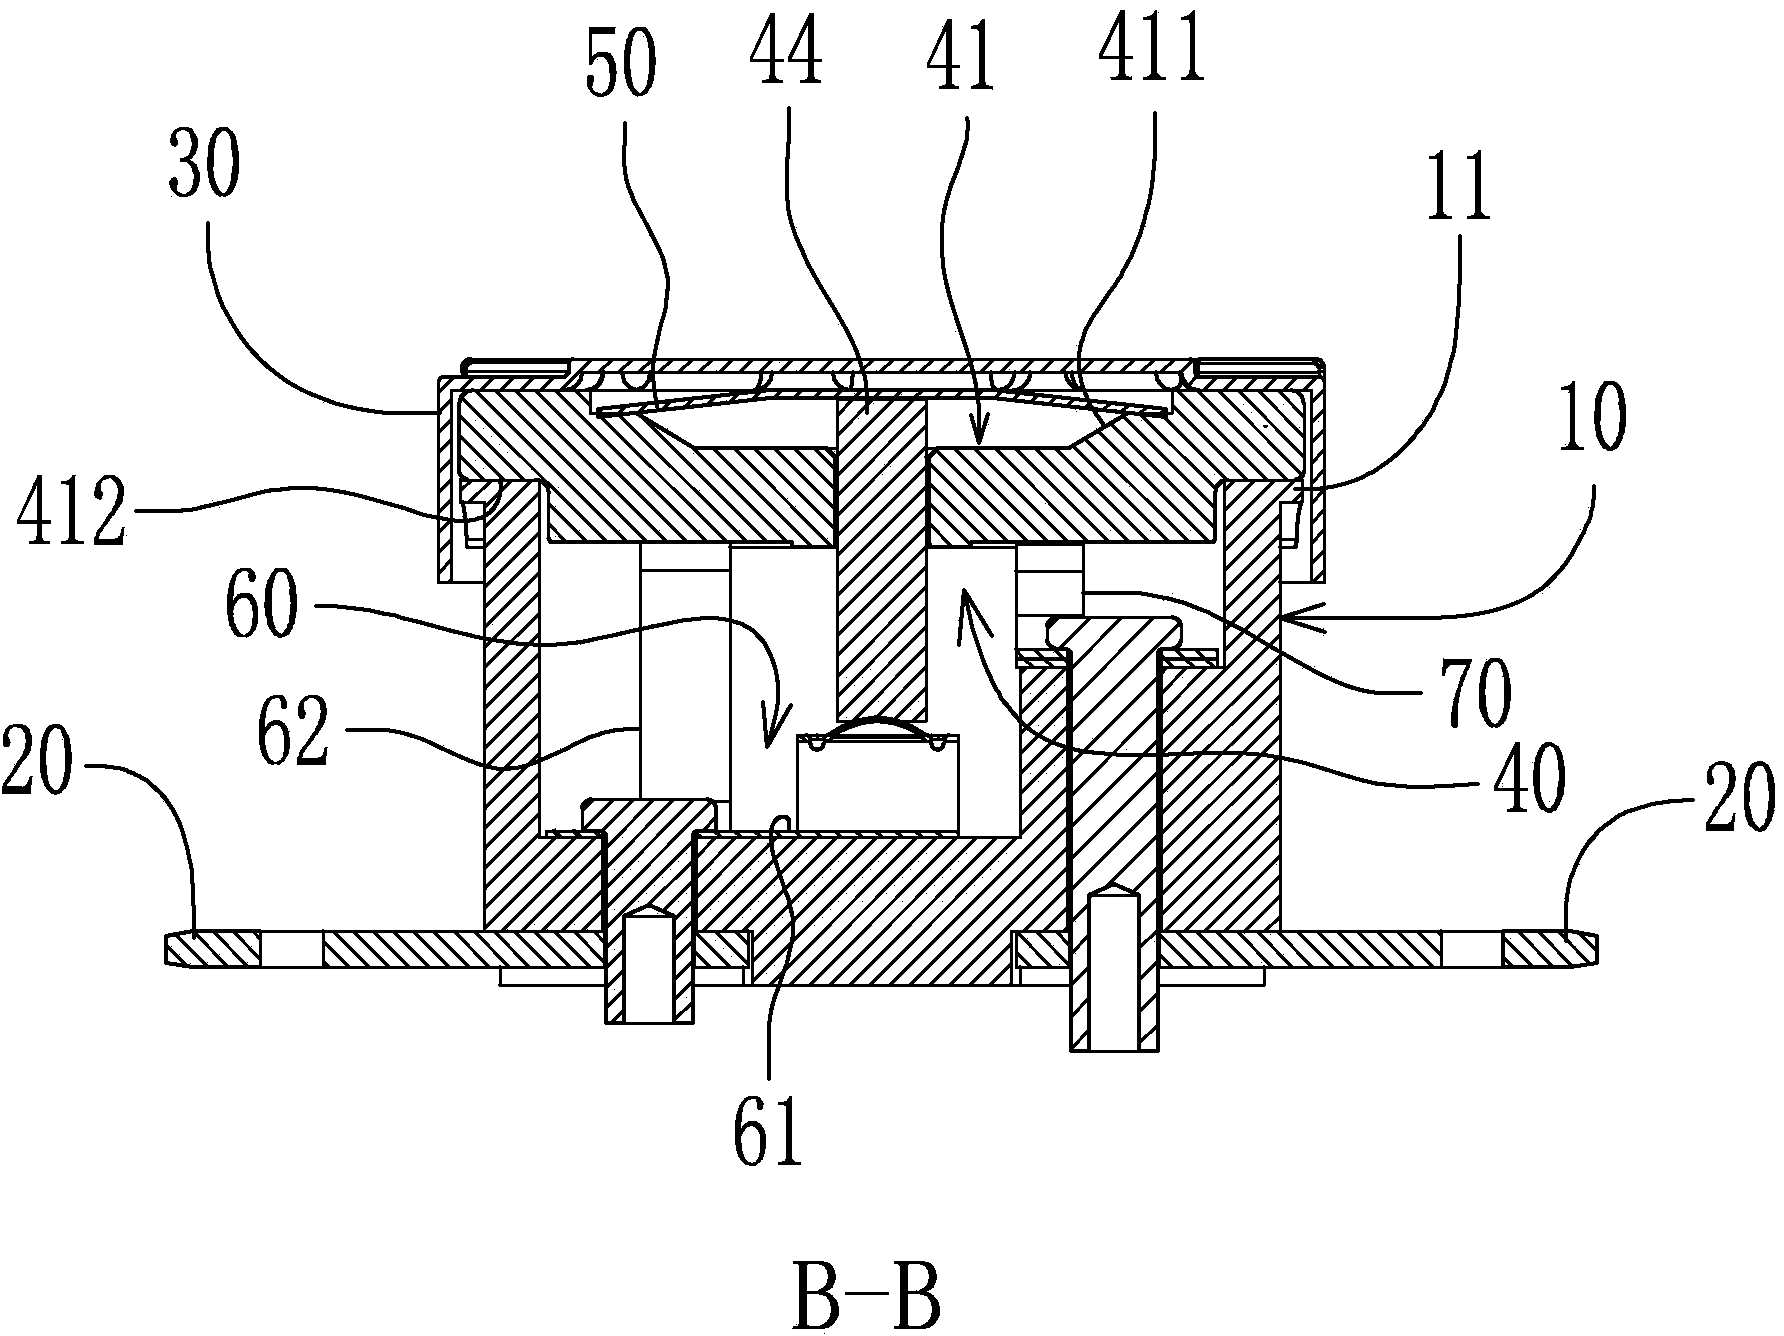 Spring-type power failure restoration temperature control switch capable of controlling multiple load circuits